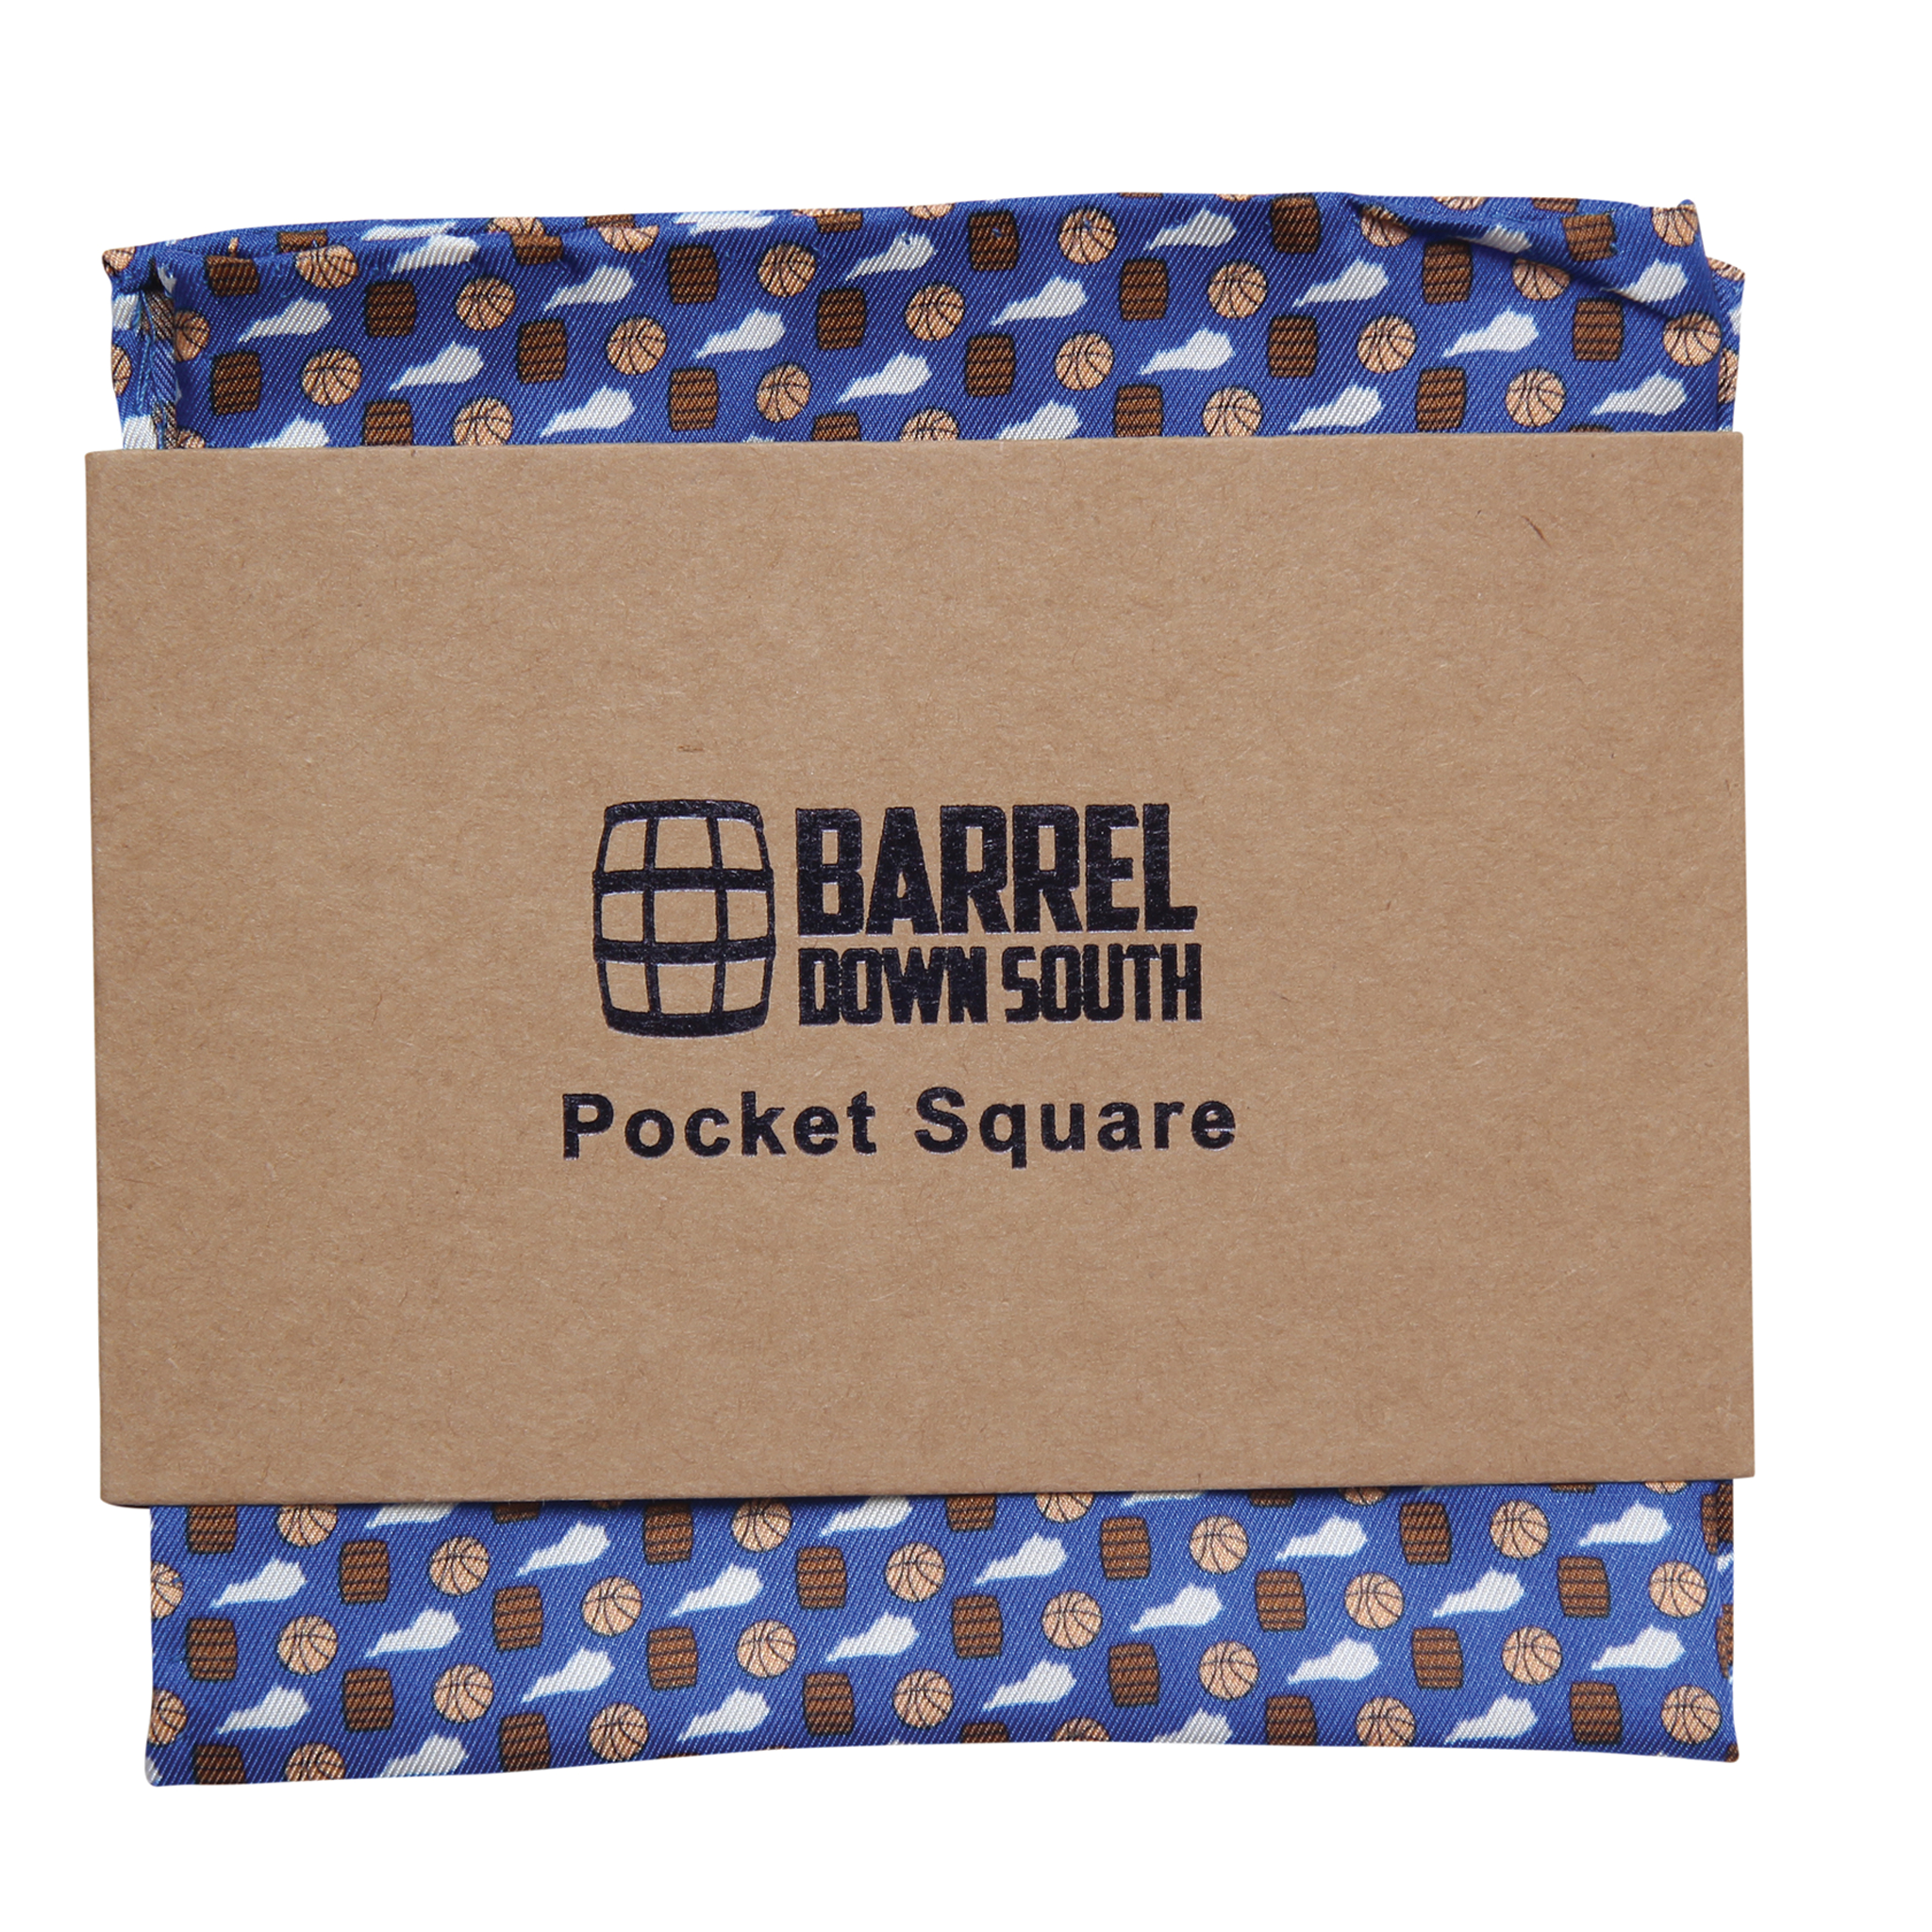 Traditions Pocket Square - Barrel Down South